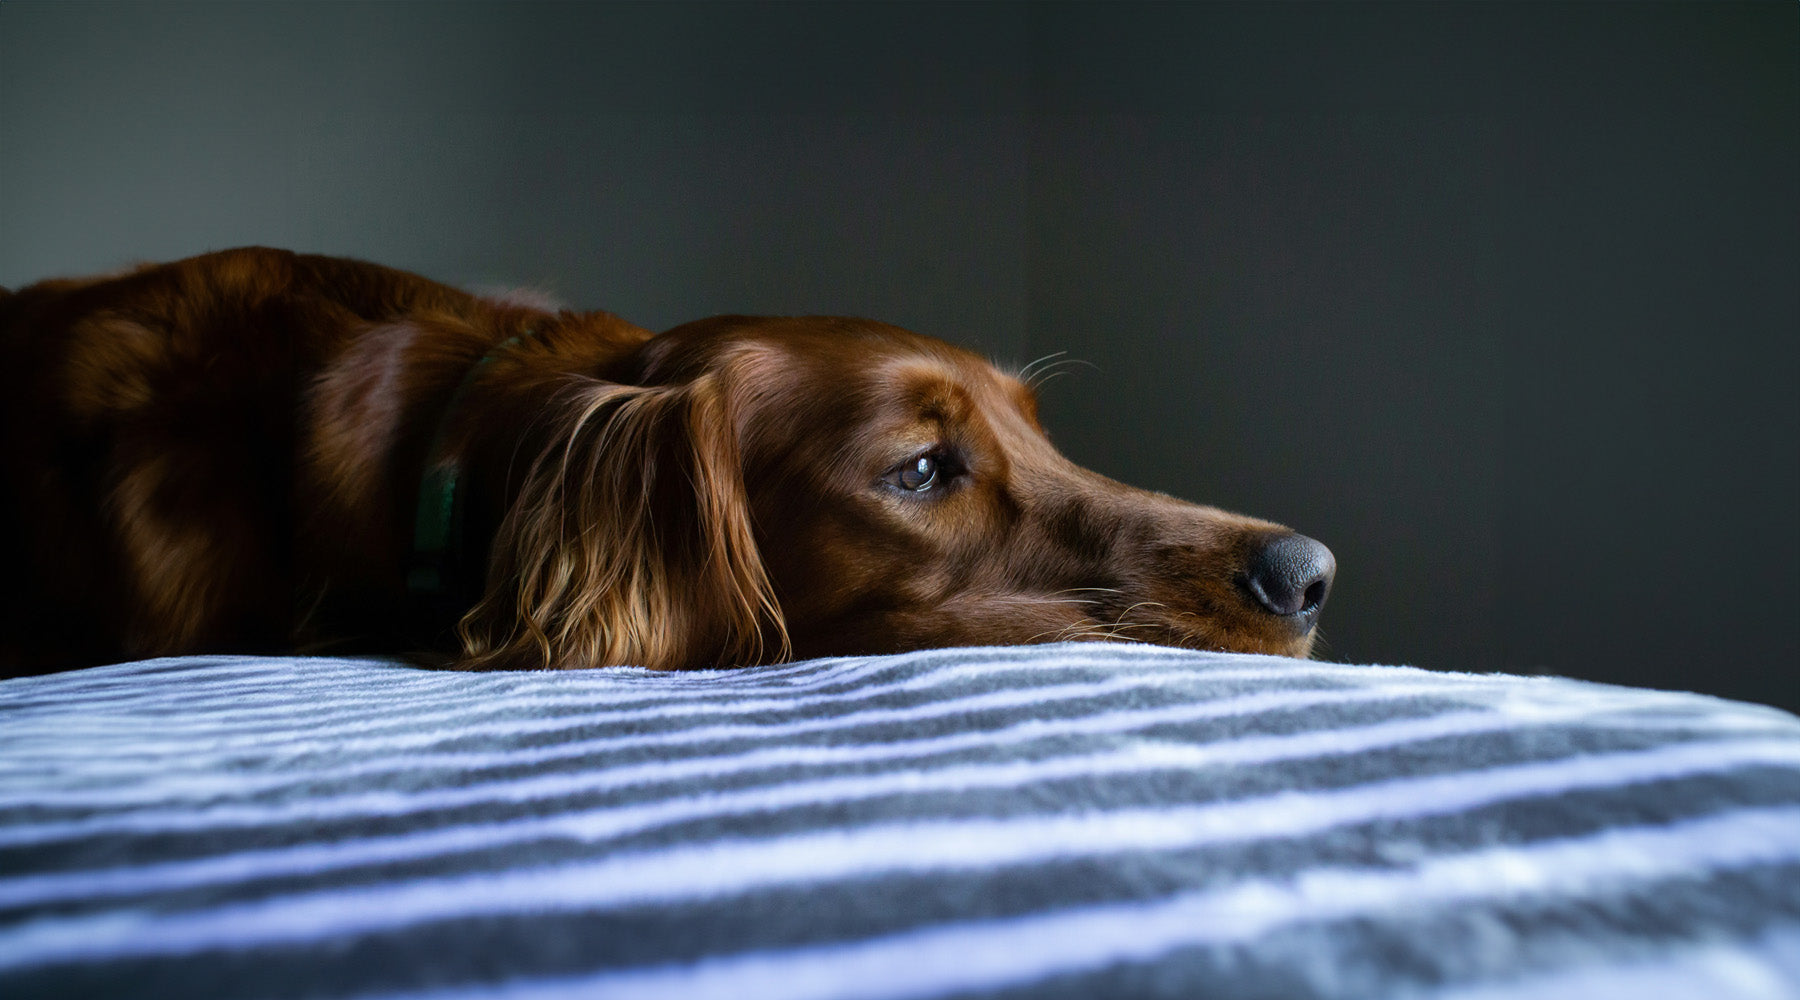 Dog on a bed looking anxious